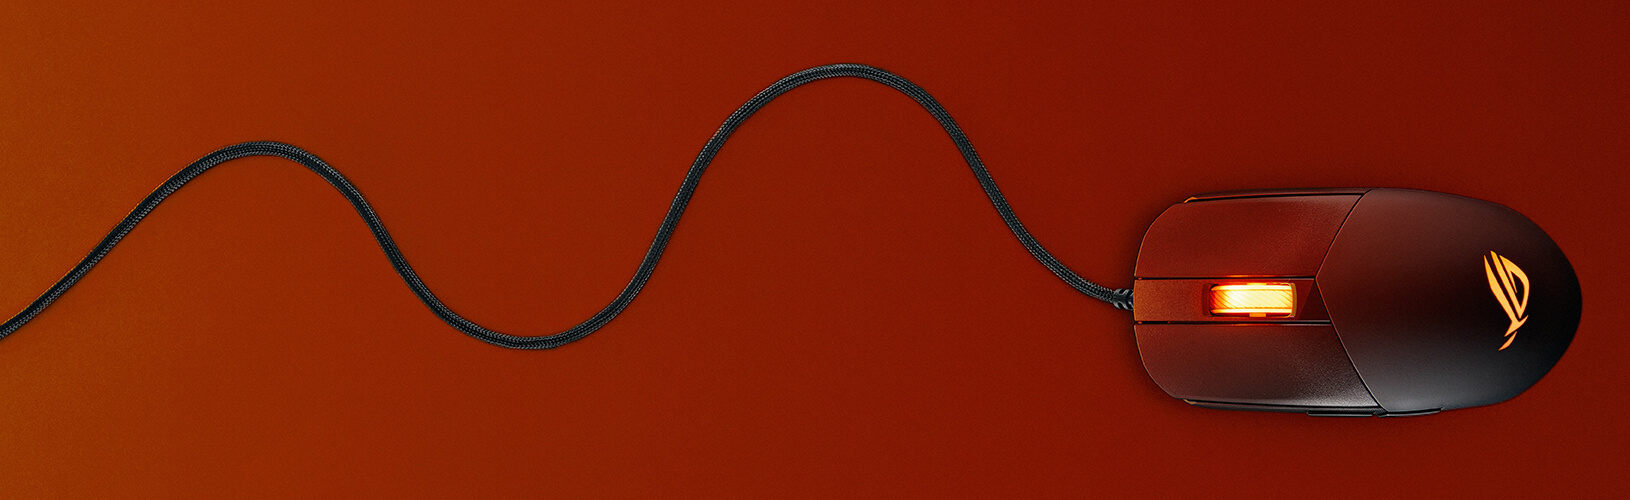 An image showing the flexible paracord on the ROG Strix Impact III